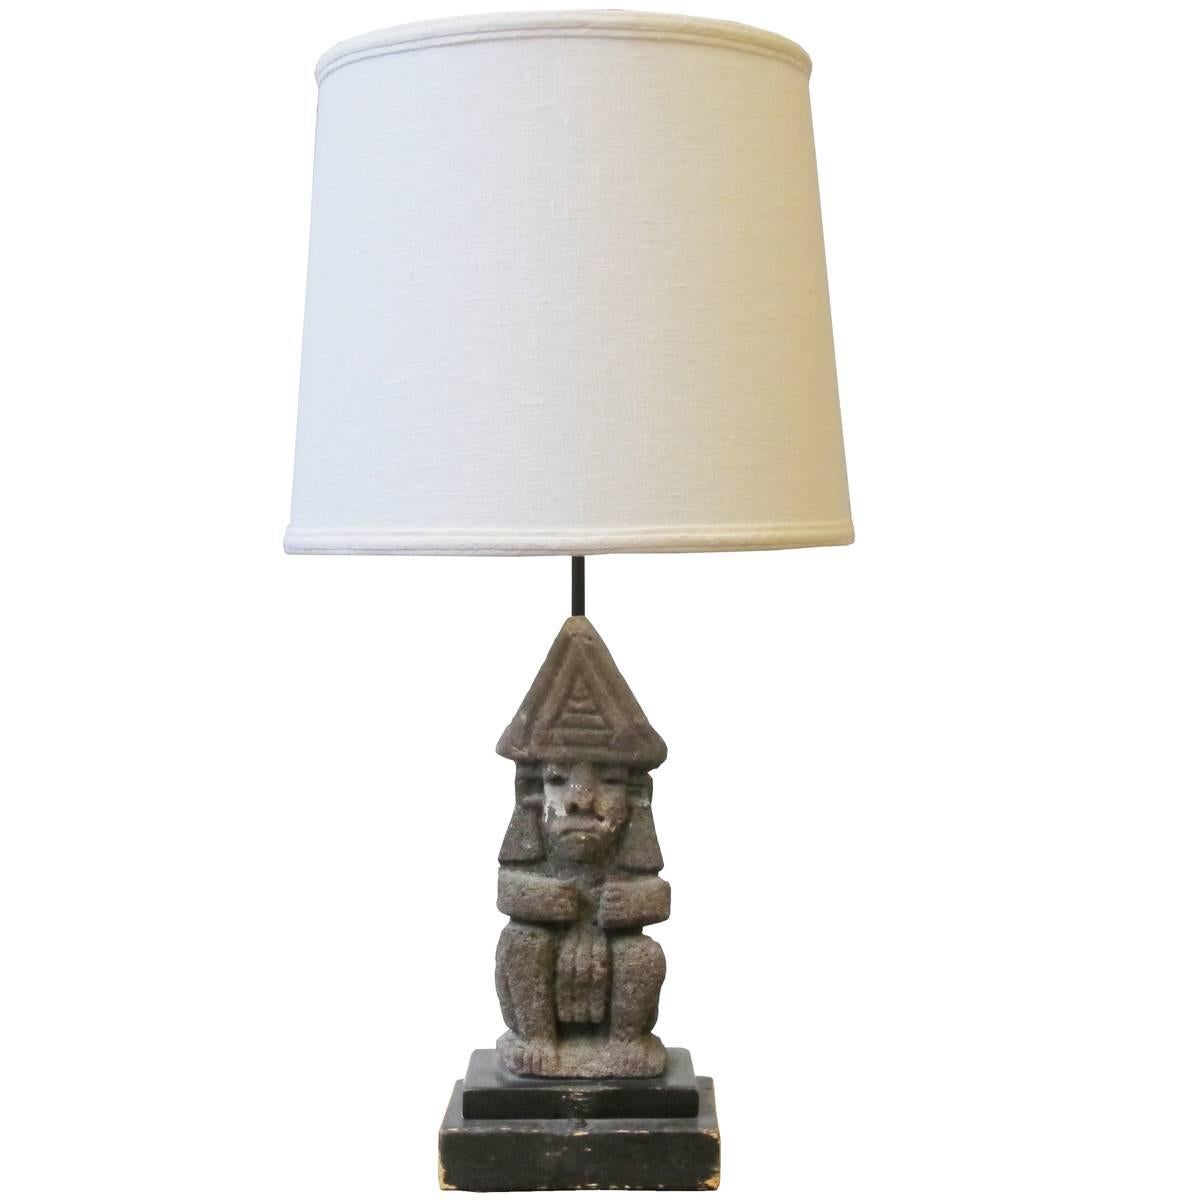 Tiki Table Lamp For Sale